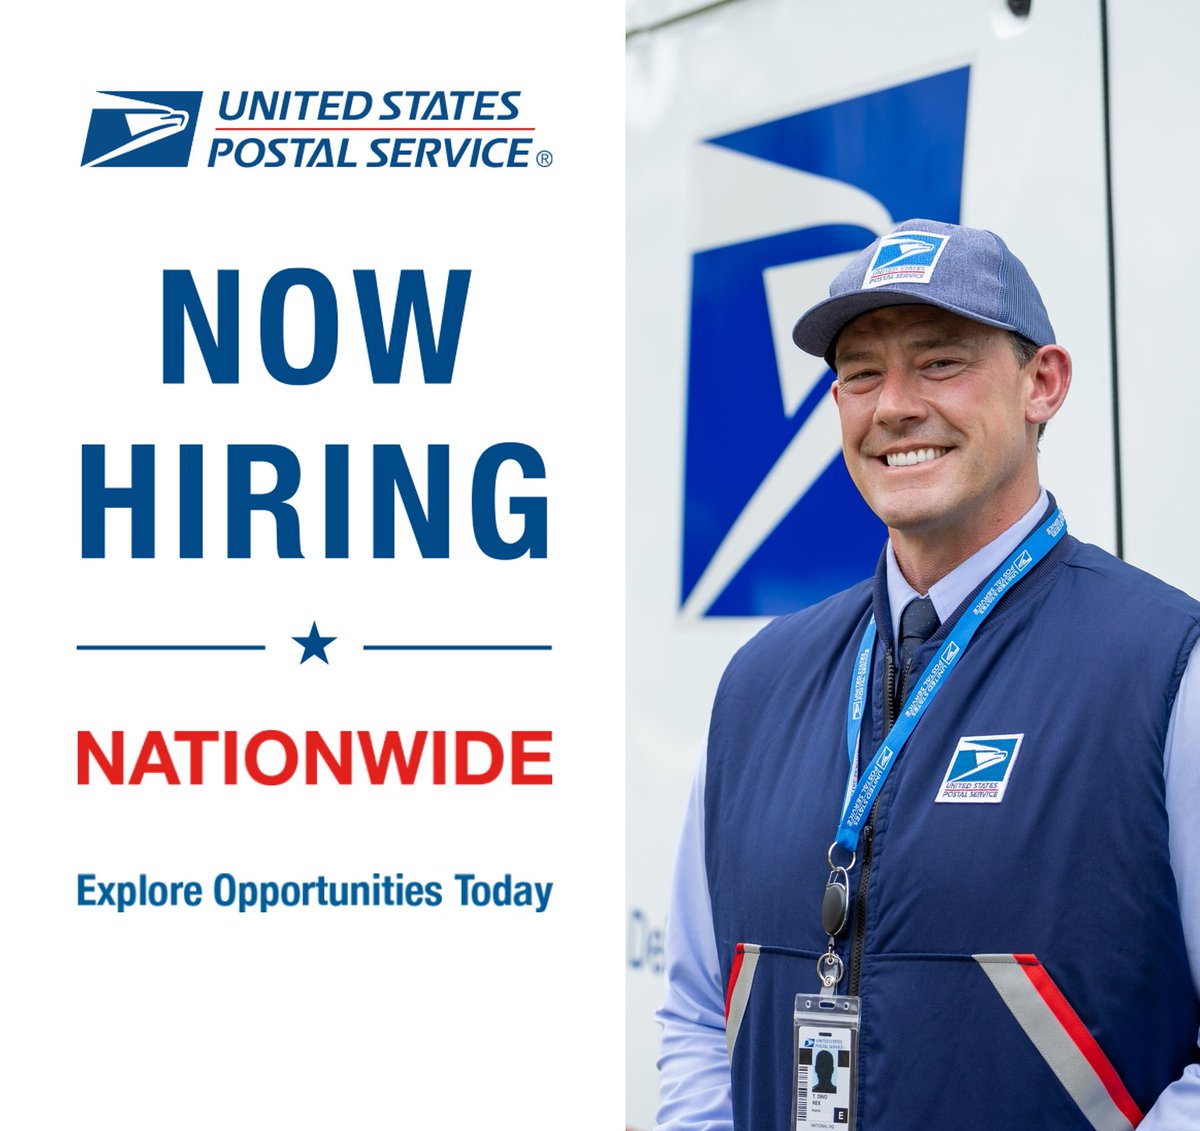 The United States Postal Service is actively recruiting for many positions that may be perfect for you. Whether full time, part time or seasonal positions, we have options available: b.link/usps-careers And for tips on where and how to apply: b.link/applyforauspsj…